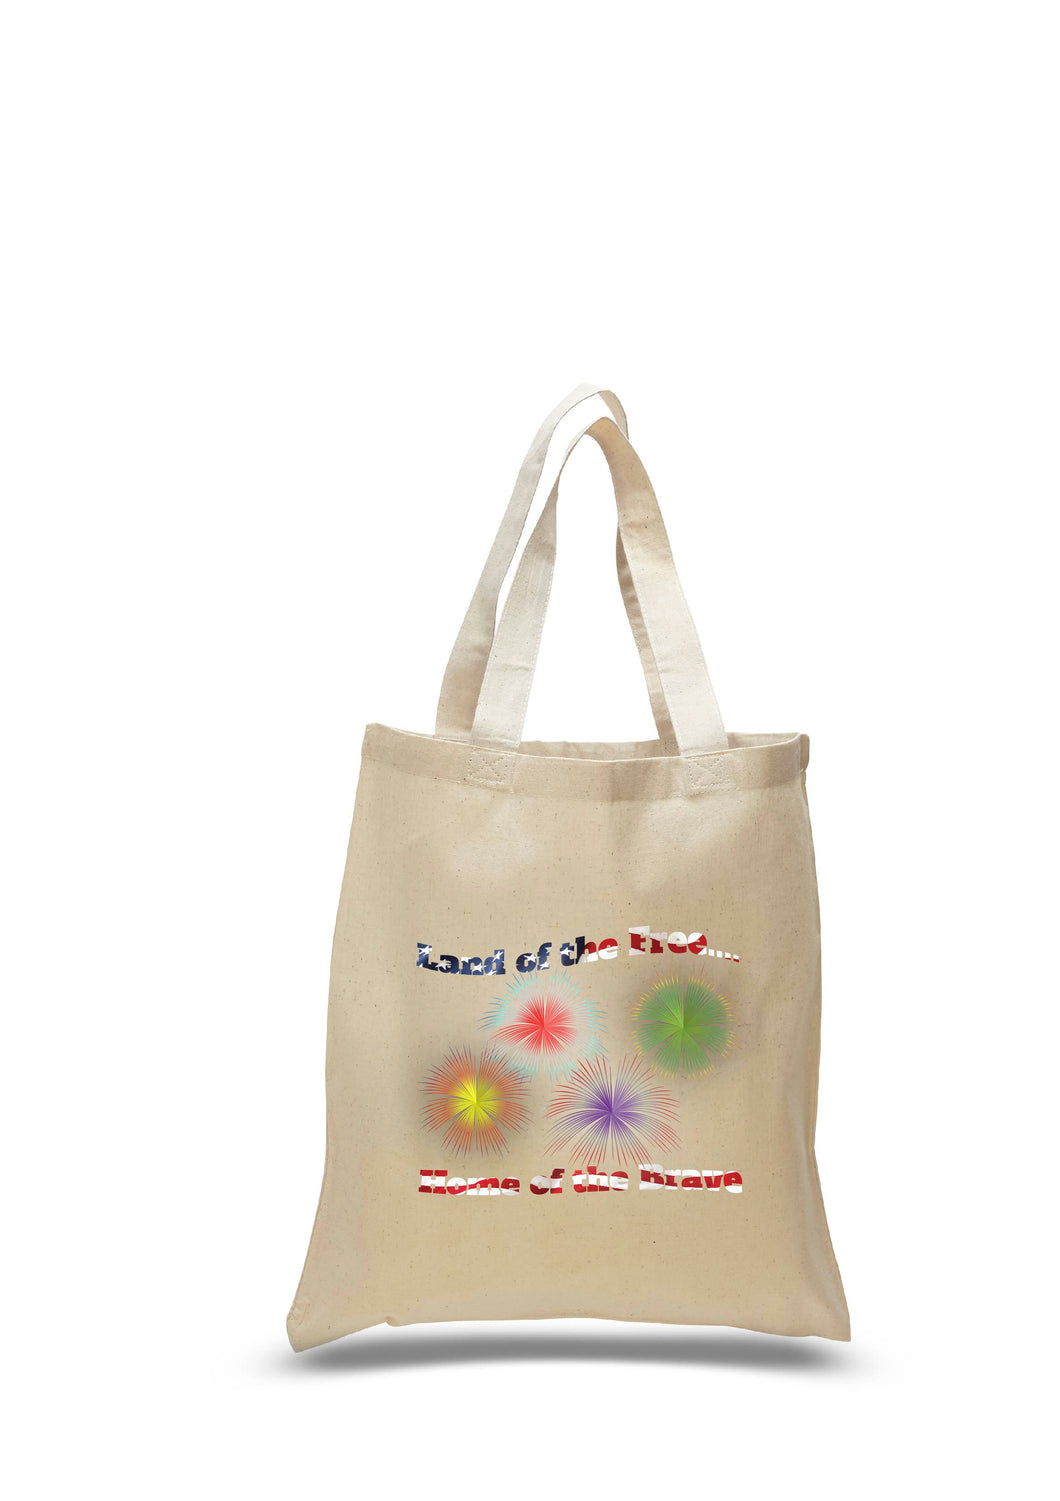 Home of the Brave Patriotic Tote